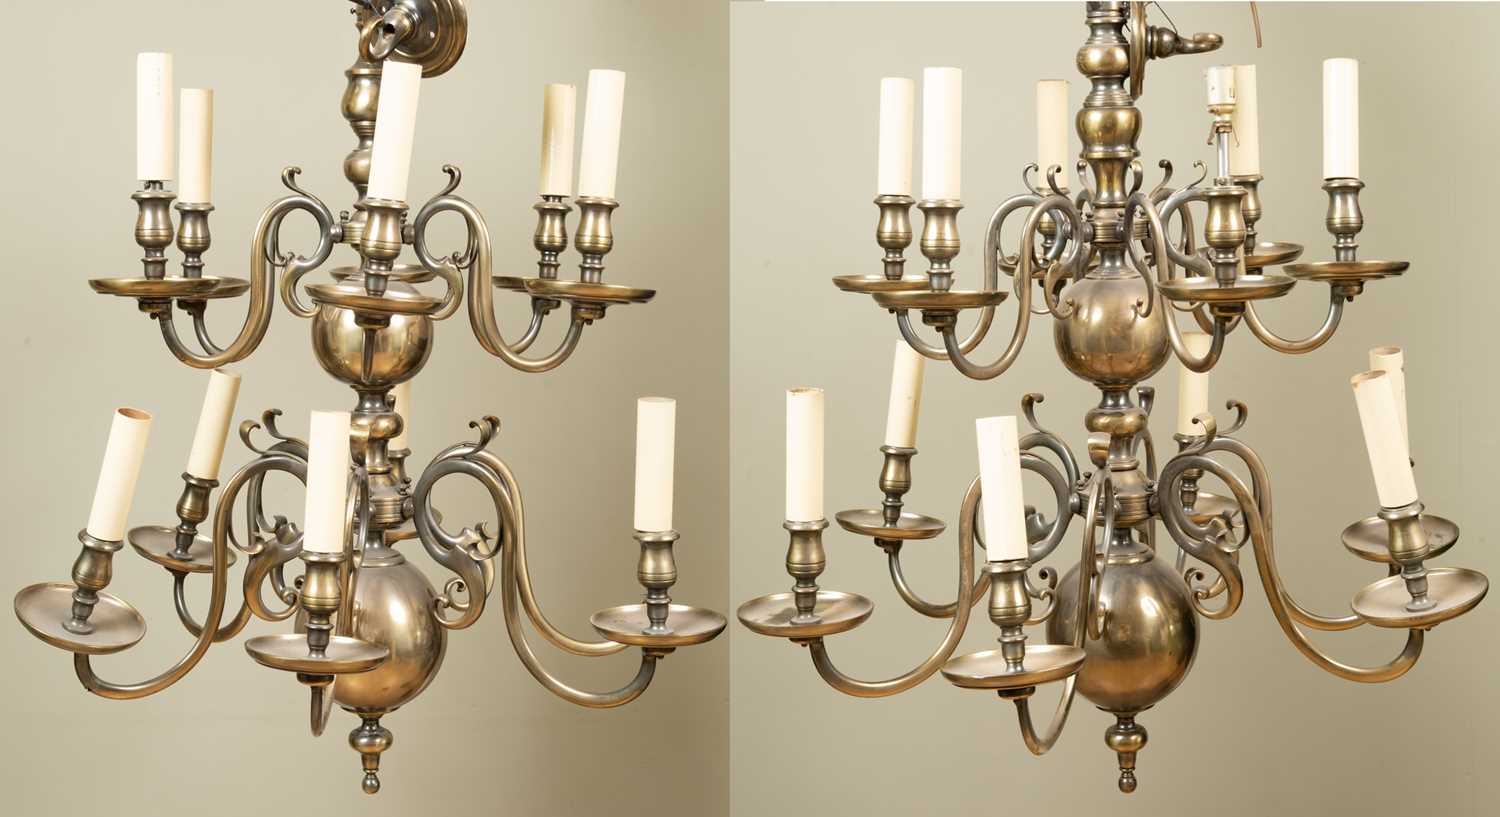 An 18th century dutch-style brass twelve-light chandelier with scrolling branches, approximately